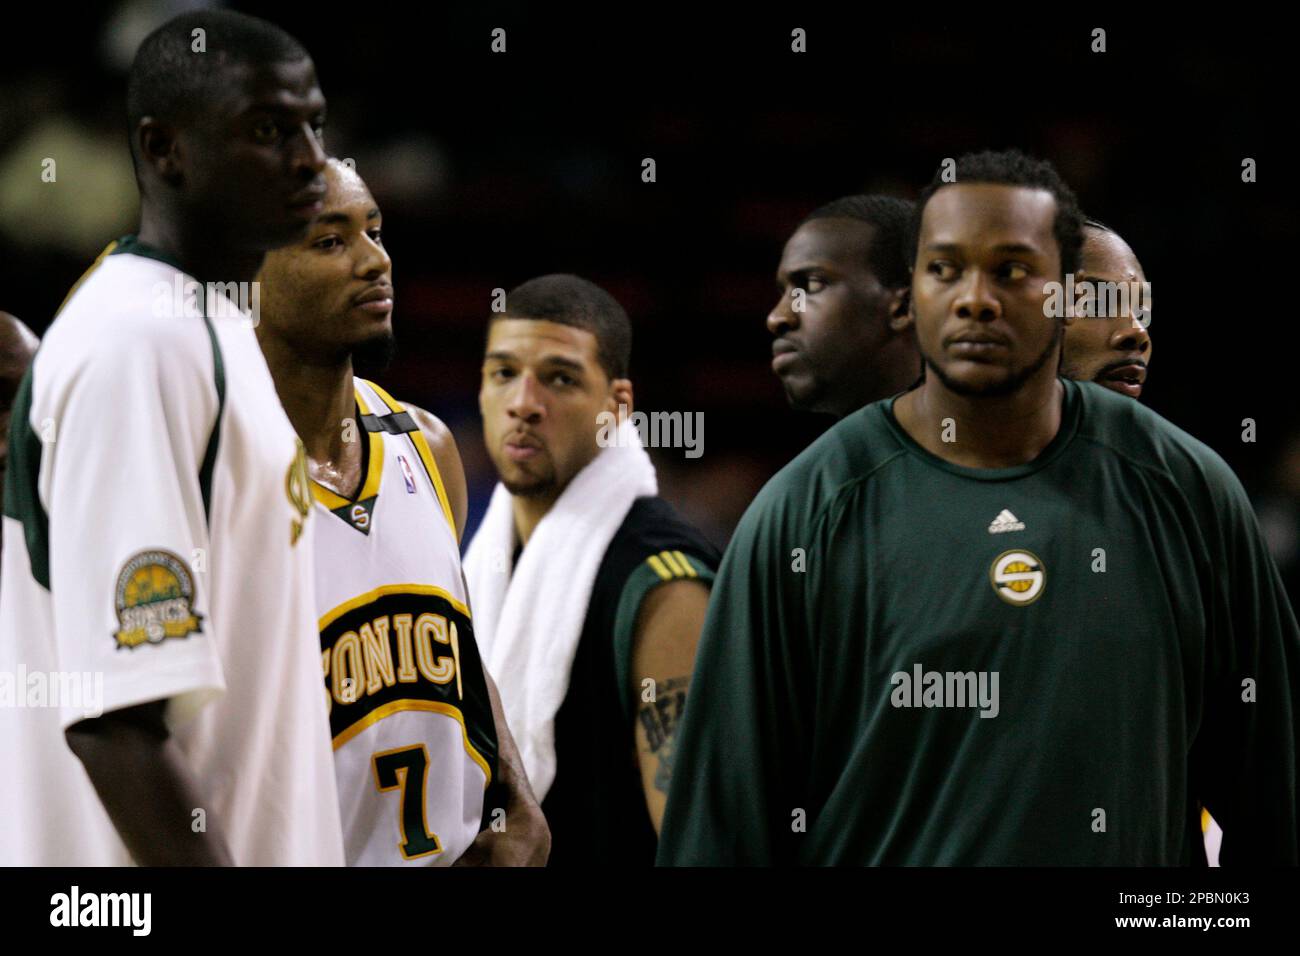 Jack Jelačić on X: 92. Seattle Sonics: Yellow I wanted Rashard Lewis to be  the picture or else I probably would have went with the white jersey, but  love that the white